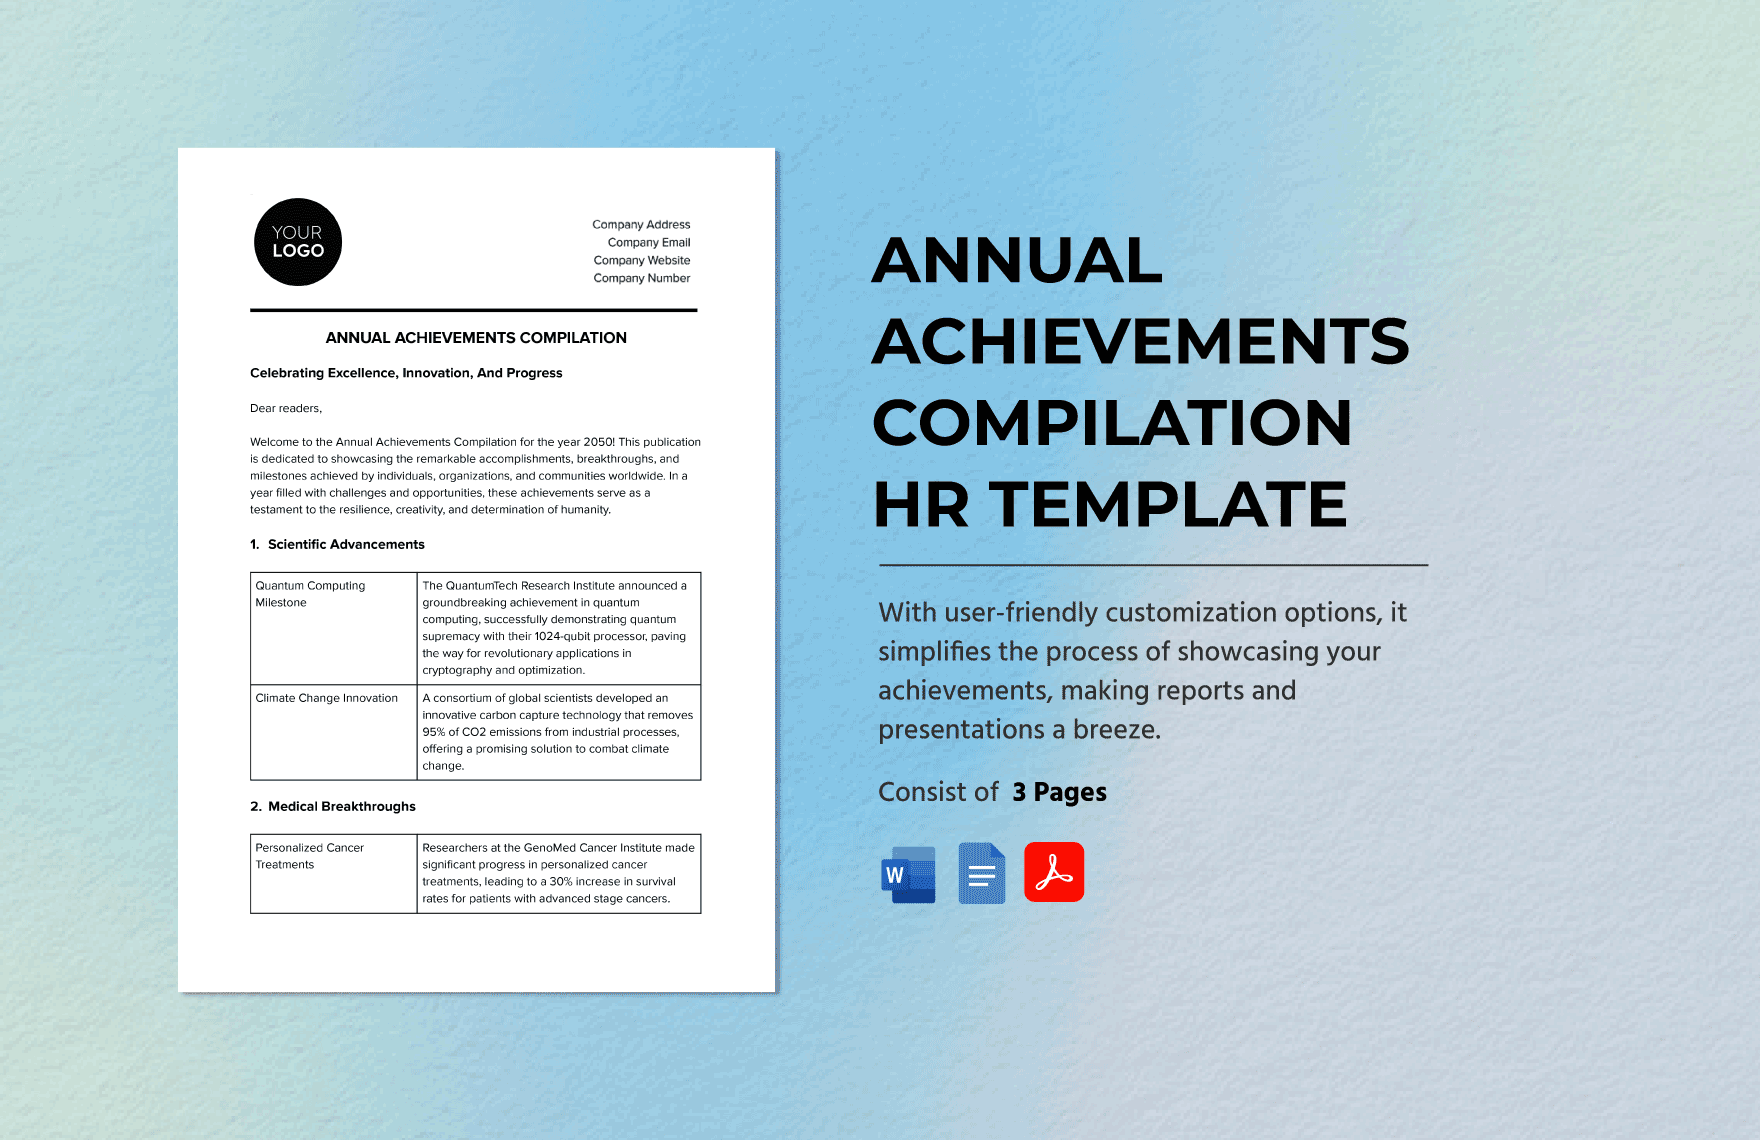 Annual Achievements Compilation HR Template in Word, Google Docs, PDF